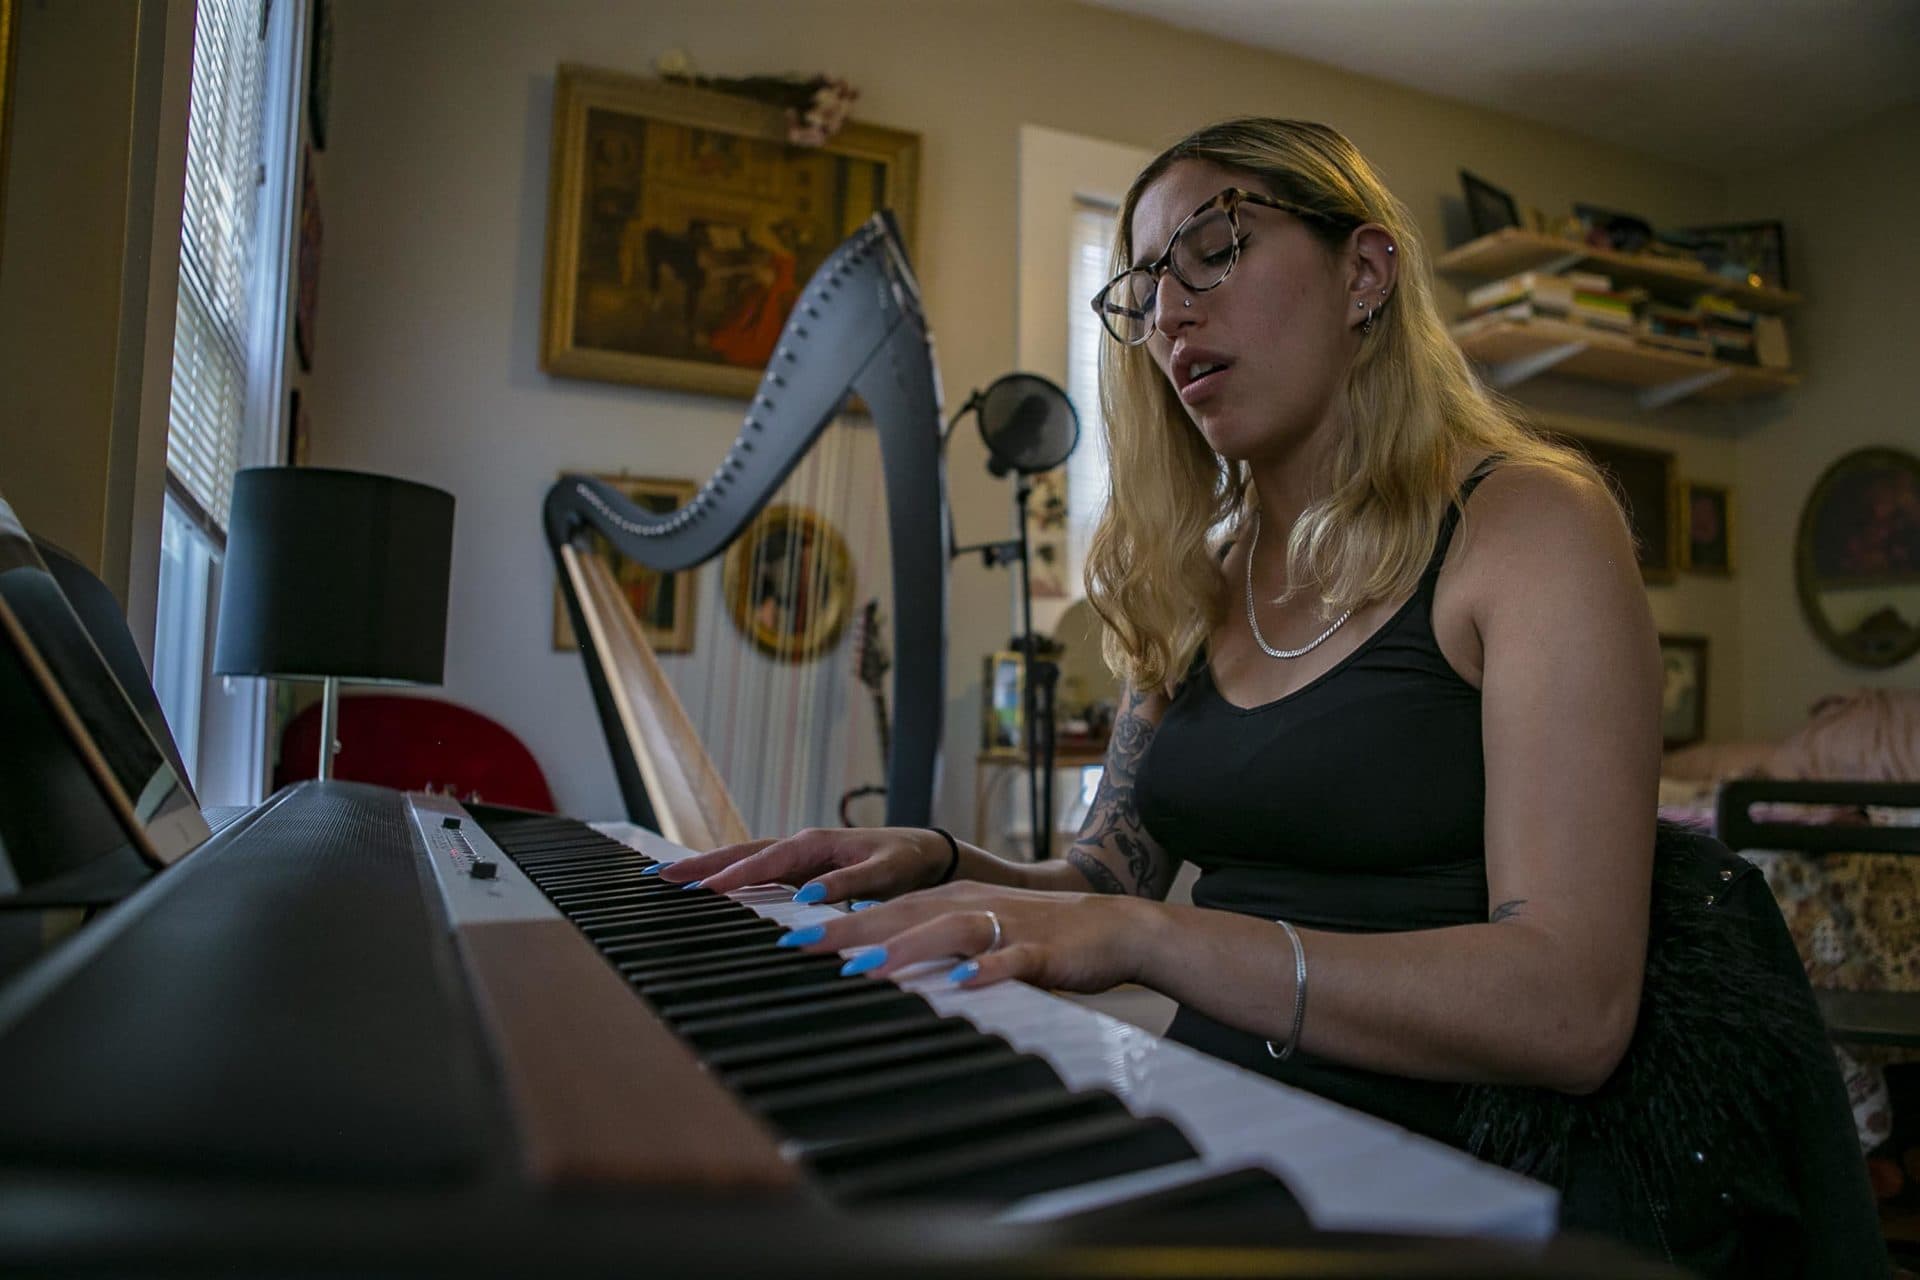 Haydee Irizarry plays an electric keyboard at her home. (Jesse Costa/WBUR)